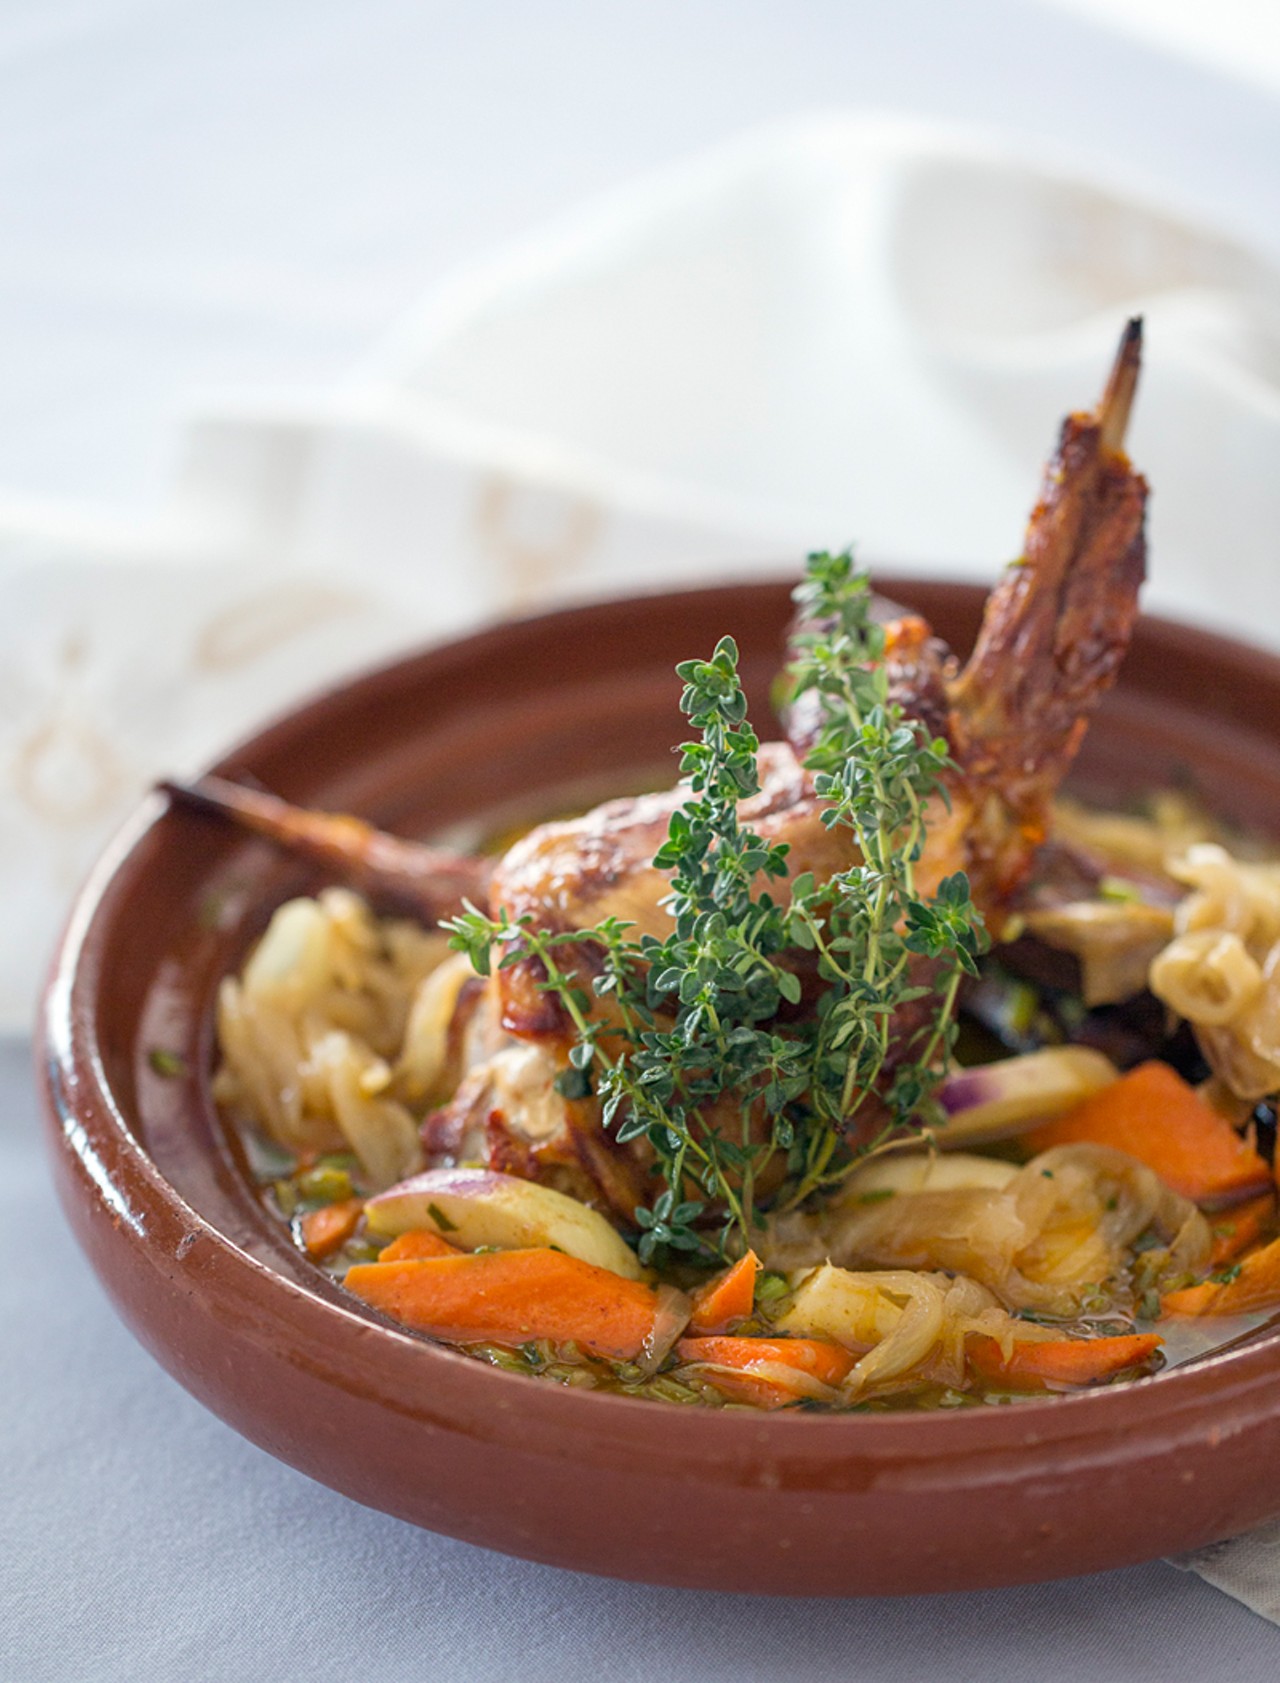 Rabbit tajine is slowly braised with onions, carrots, turnips and potatoes and is served in a rich herb broth.